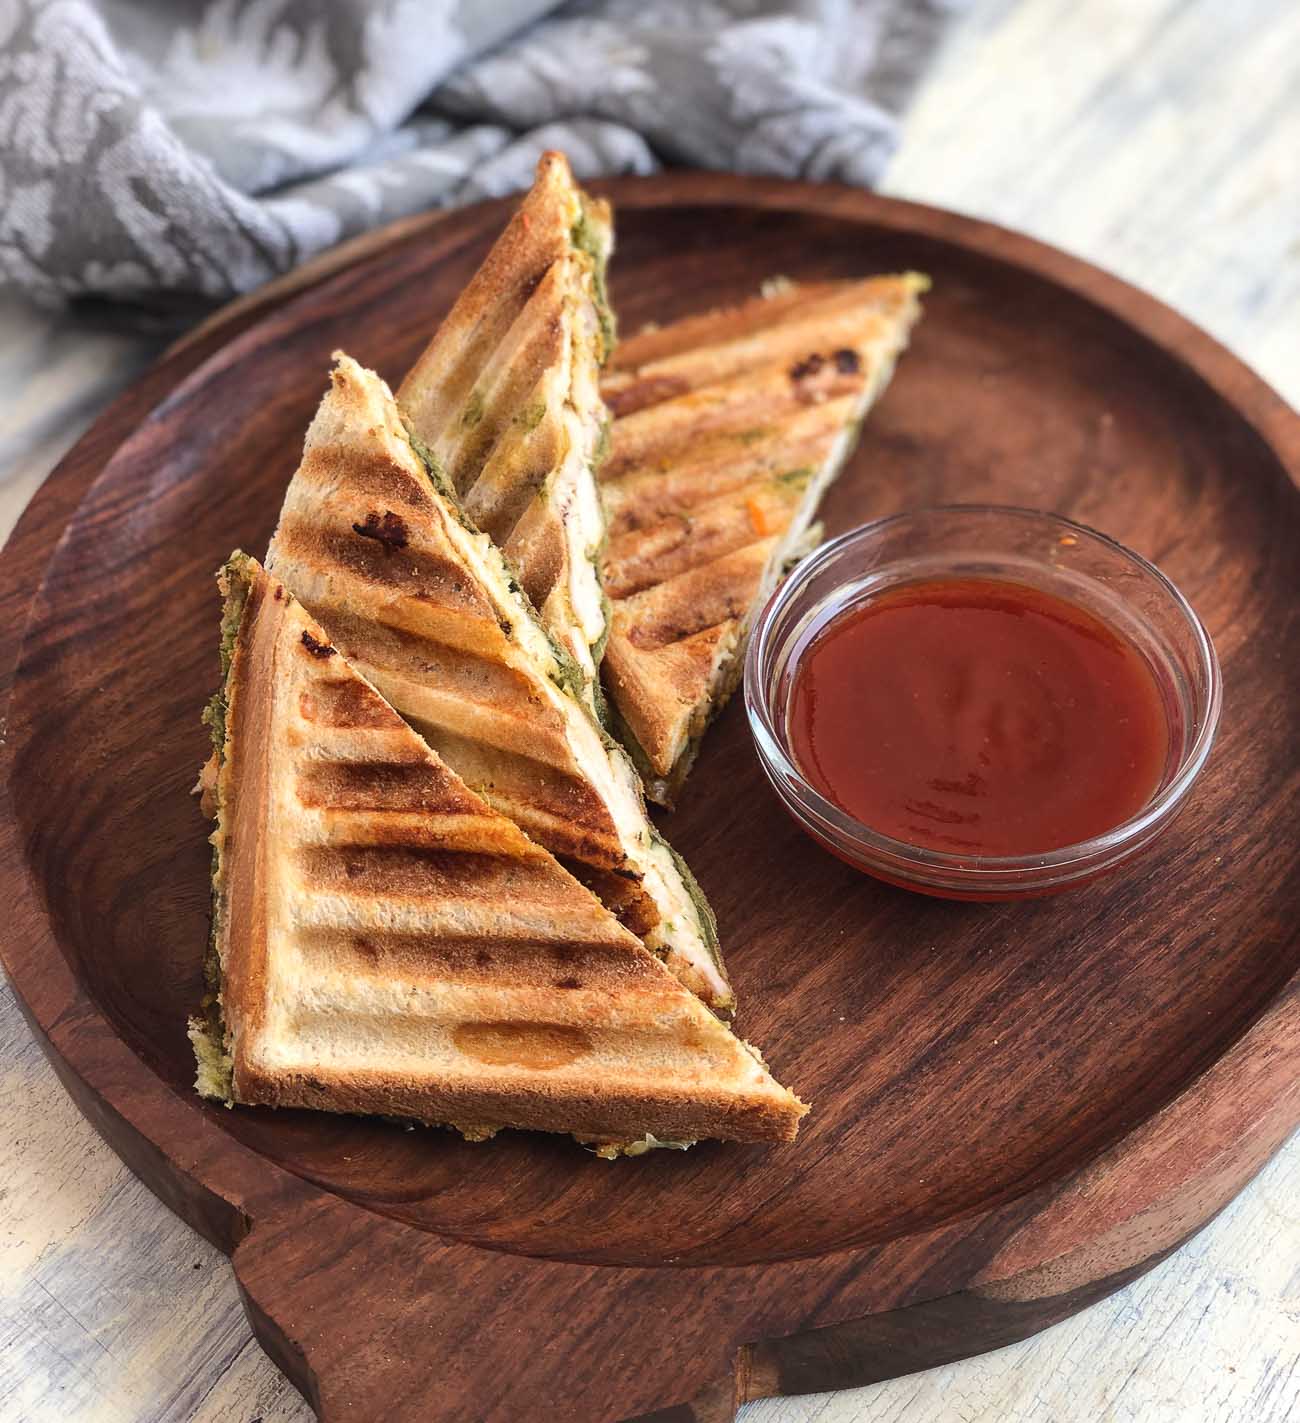 Cheesy Grilled Sandwich With Smoked Chicken Recipe